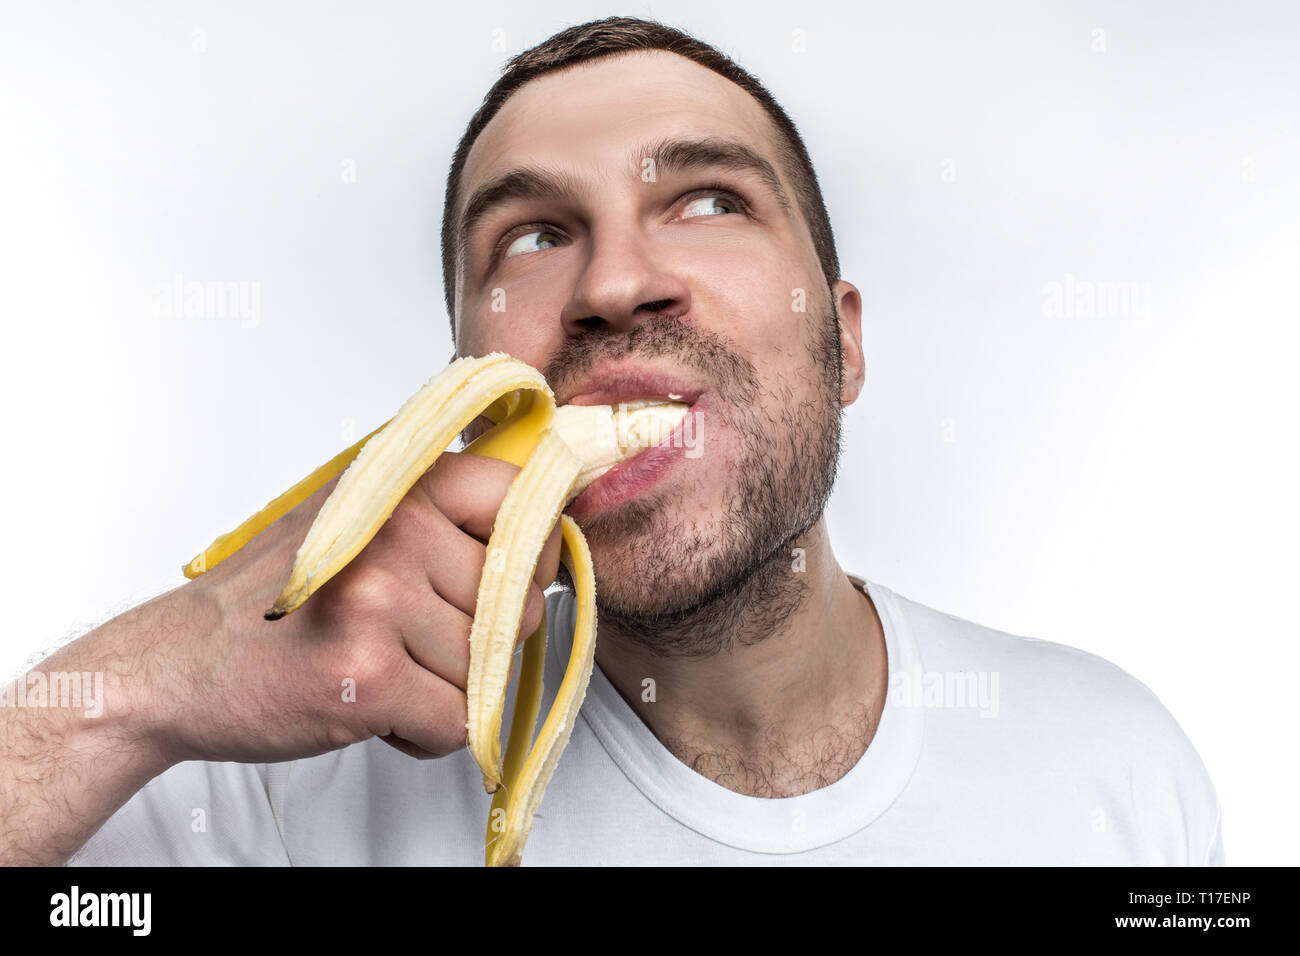 Another strange picture of unshaved guy eating ripe banana. He is biting a big piece of fruit. Man is enjoying the mmoment and looking somewhere aside Stock Photo